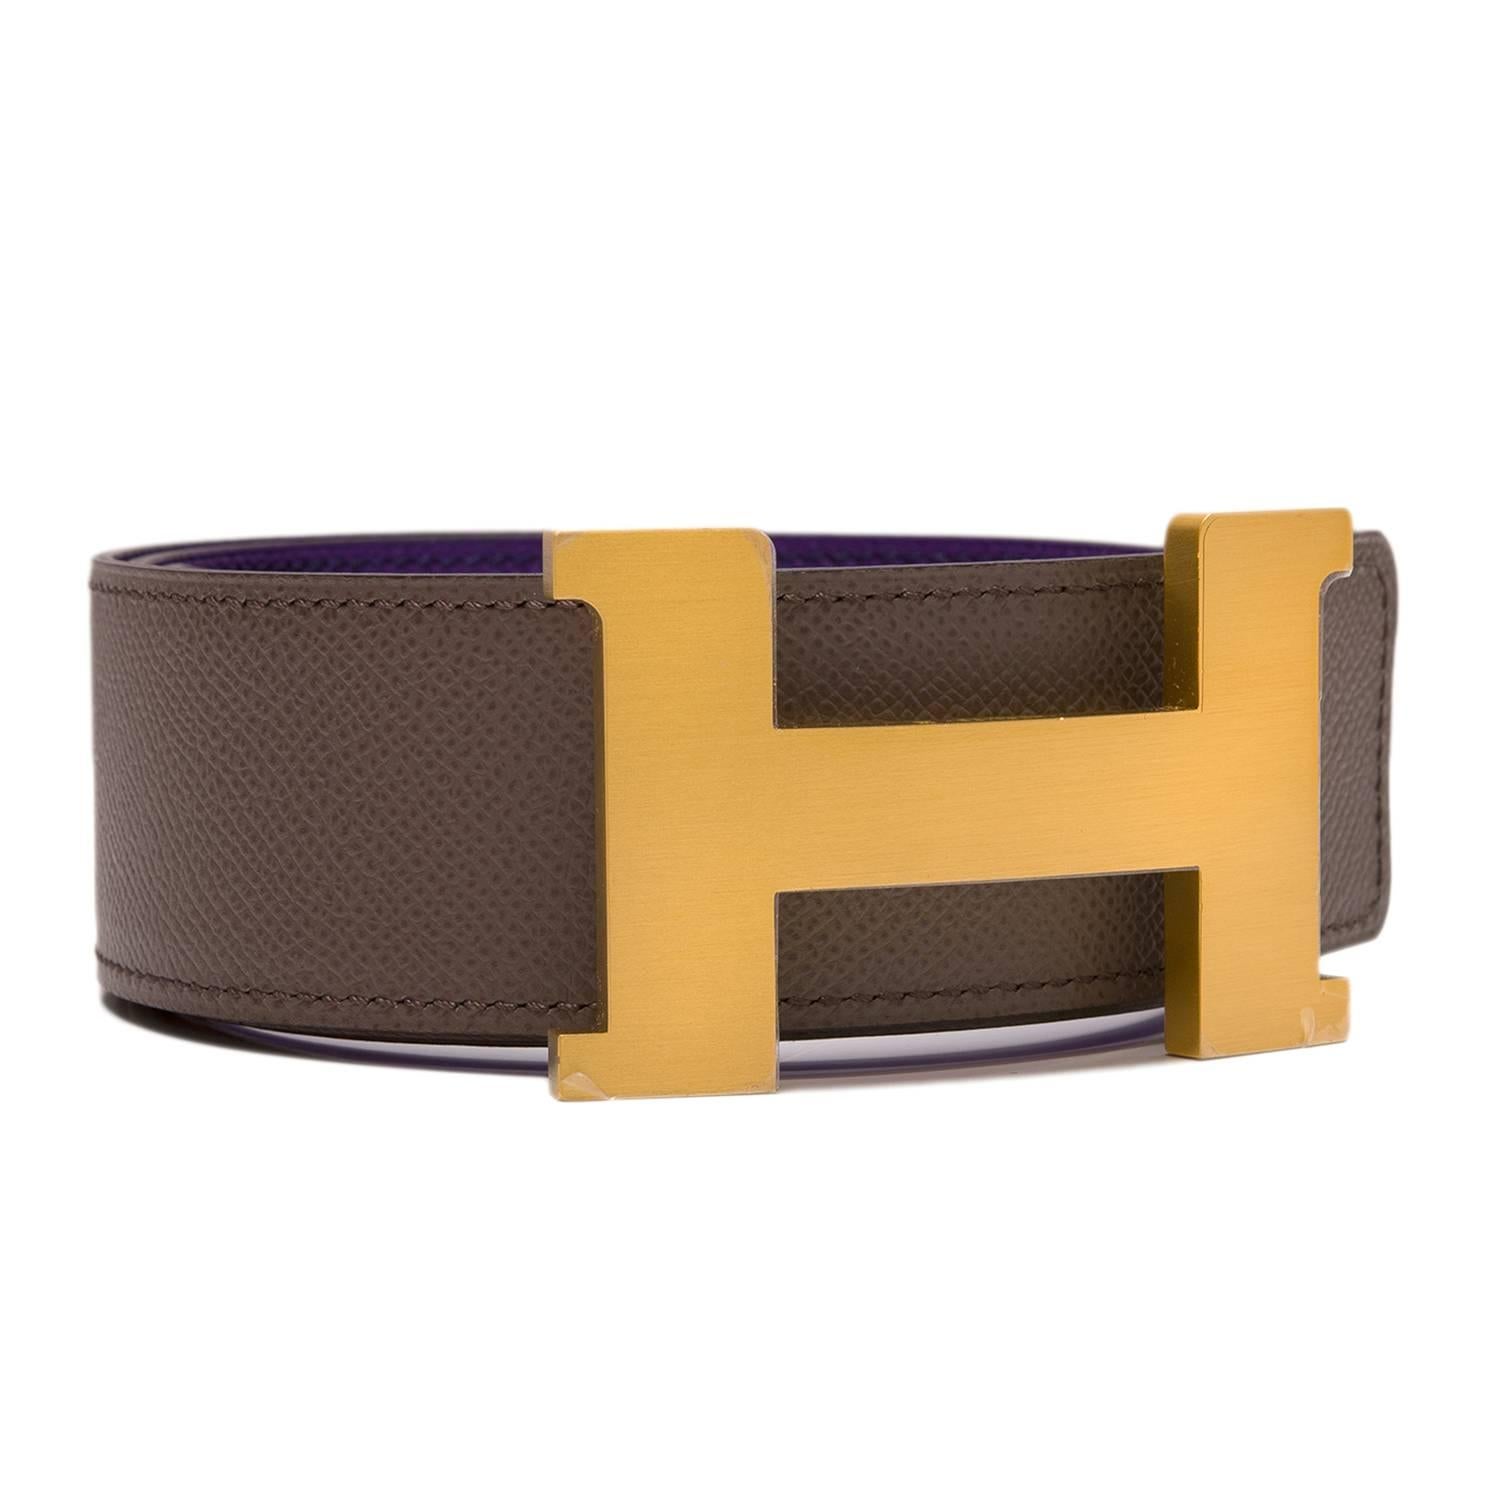 Hermes belt kit comprising an adjustable wide 42mm Constance H belt of Crocus epsom with tonal stitching reversing to Etain epsom with tonal stitching accompanied by a removable brushed gold H buckle.

Origin: France

Condition: Pristine, never